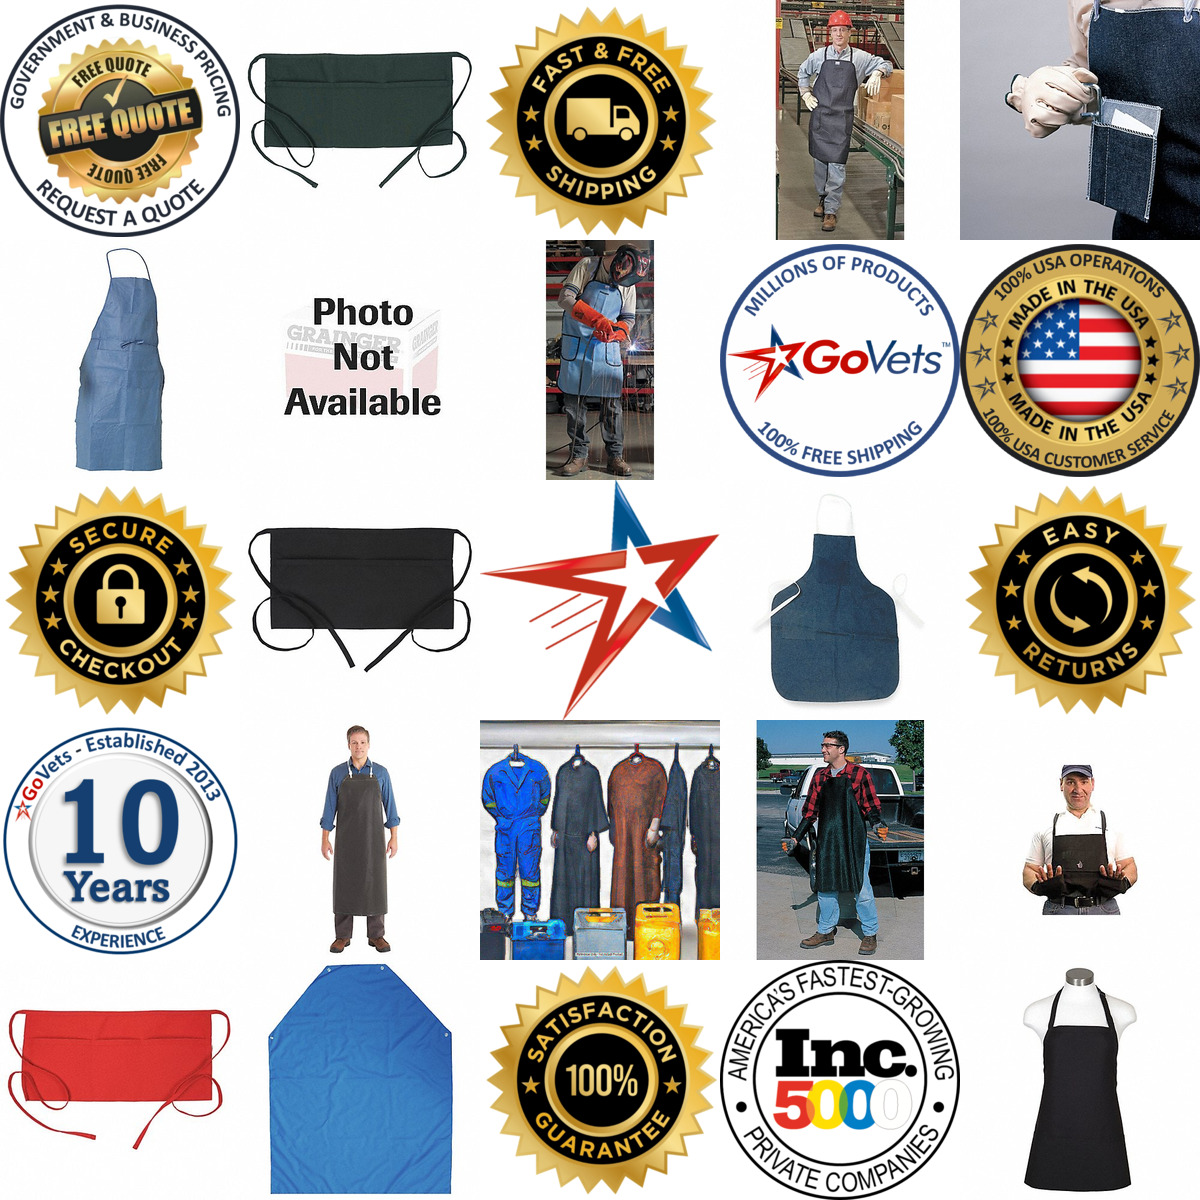 A selection of Shop and Work Aprons products on GoVets